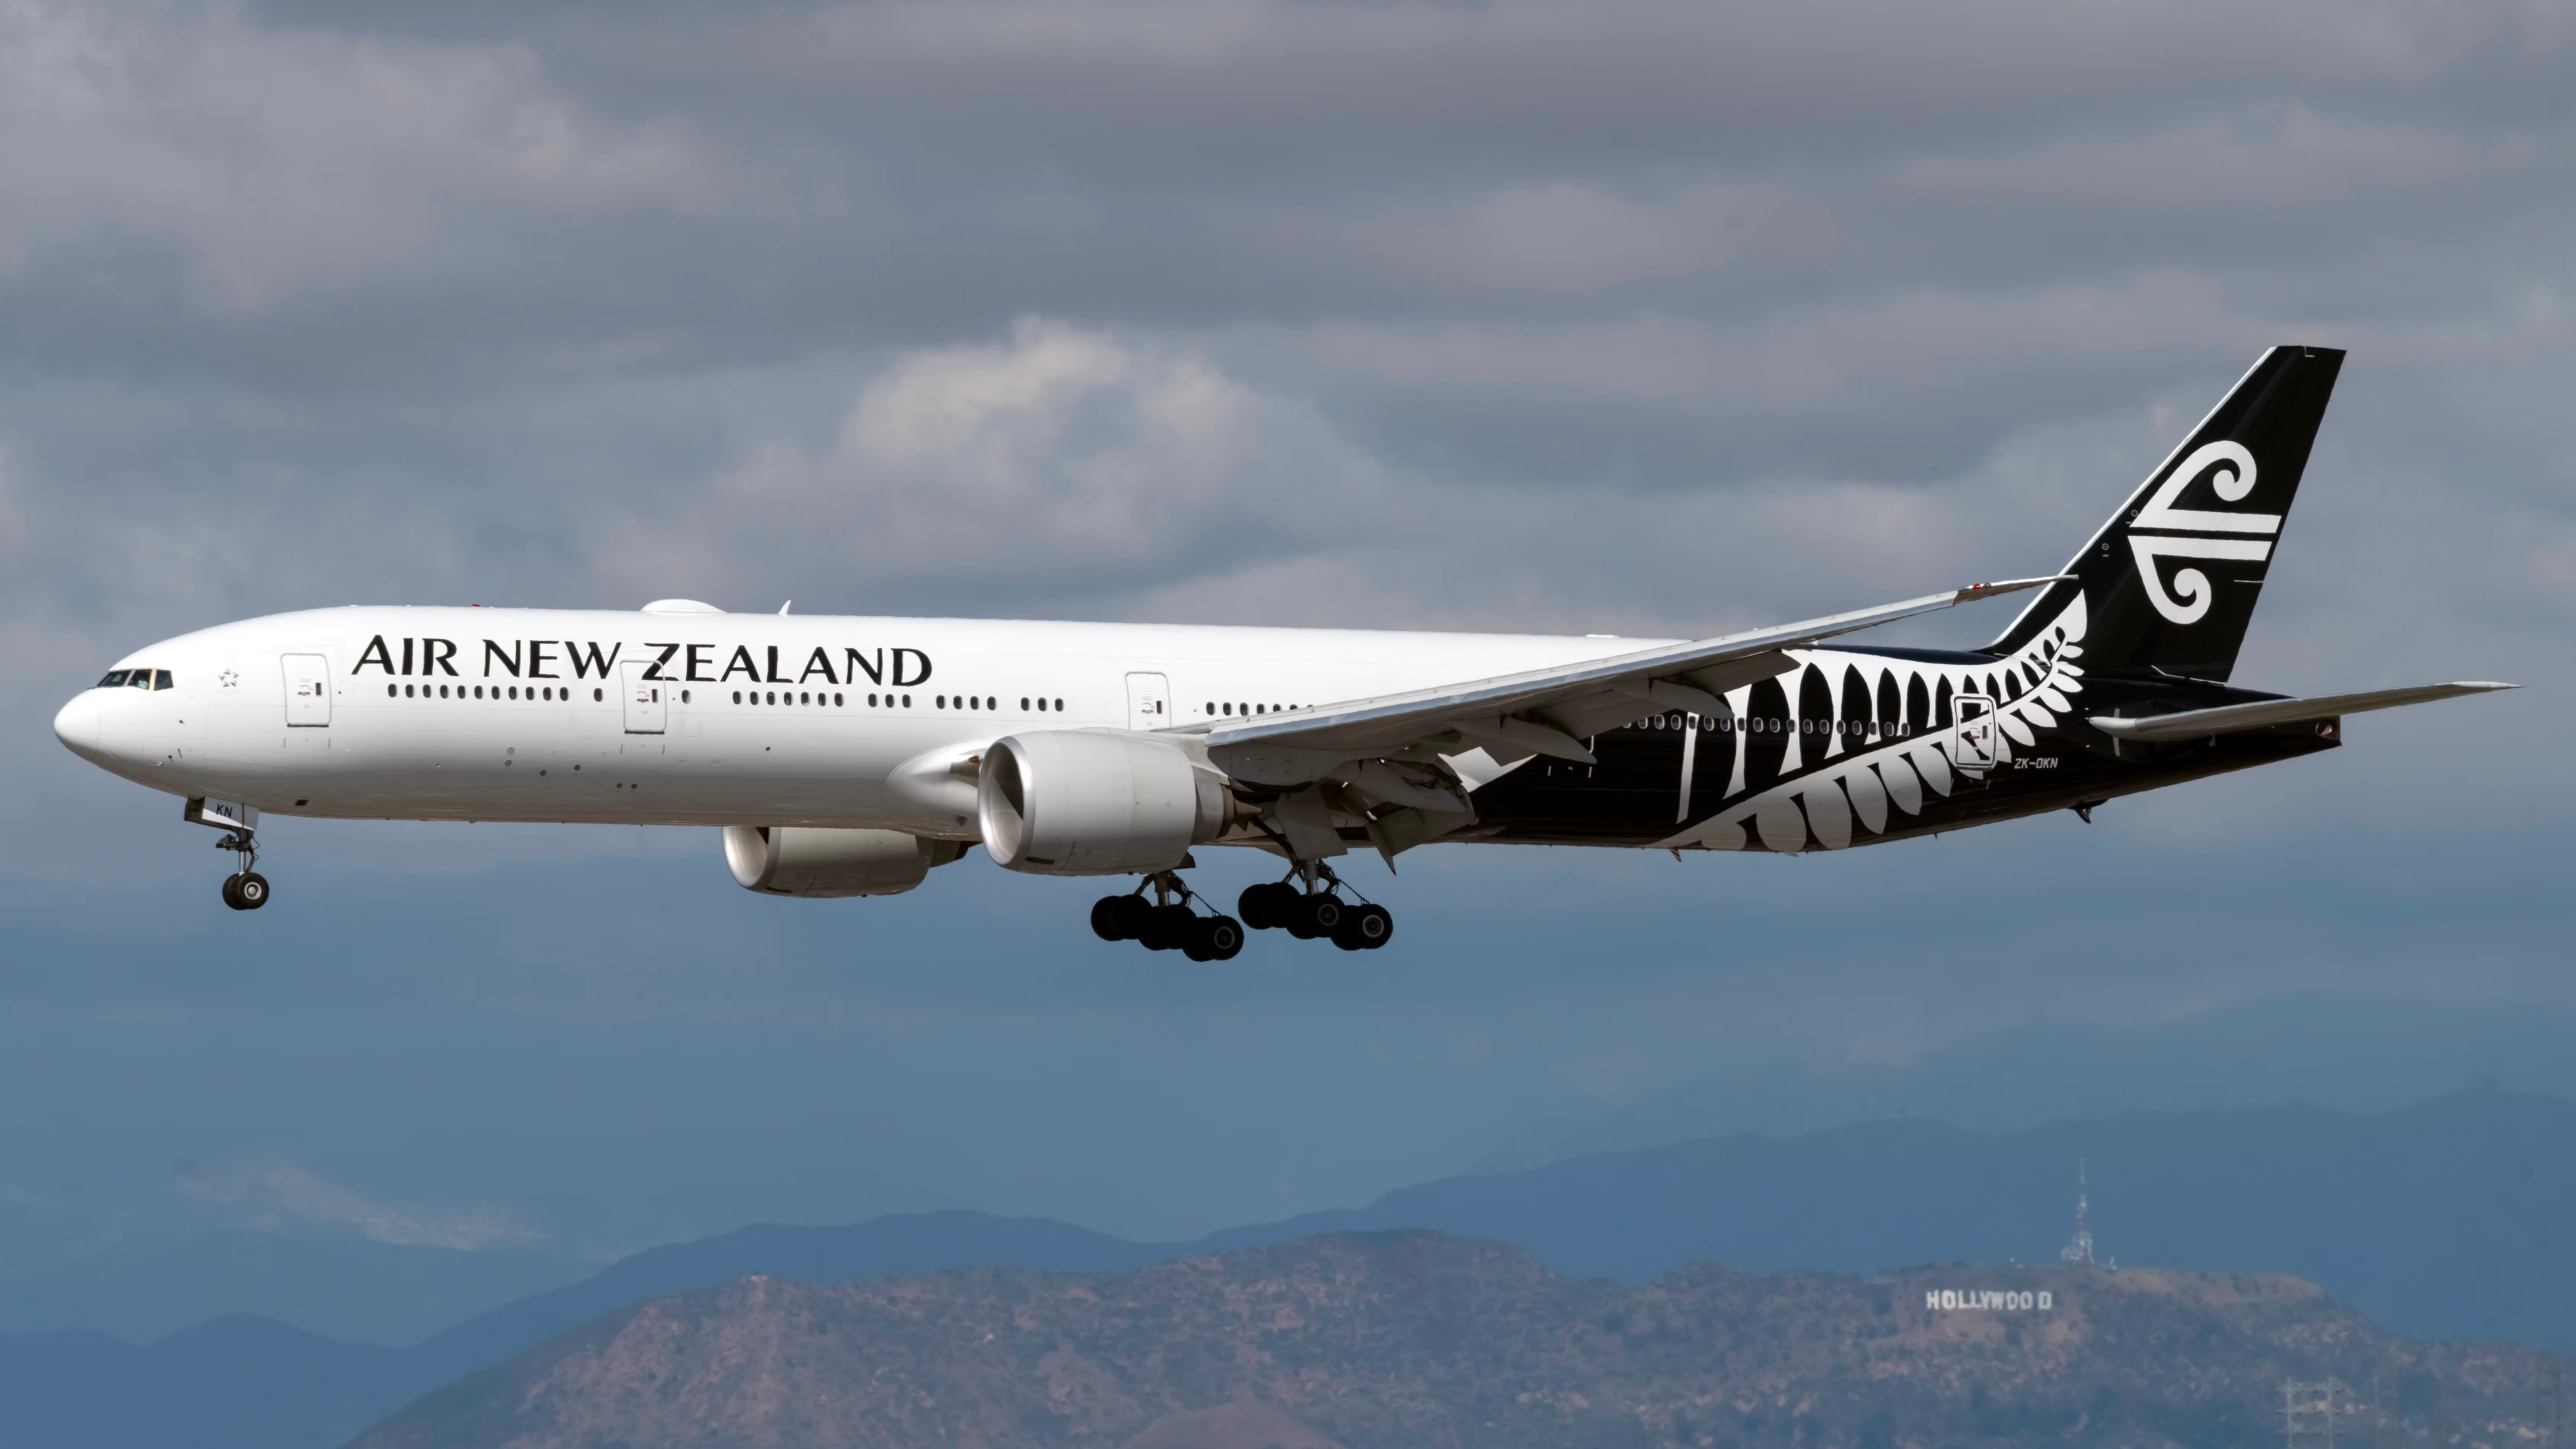 Air New Zealand Boeing 777-300ER landing at Los Angeles 